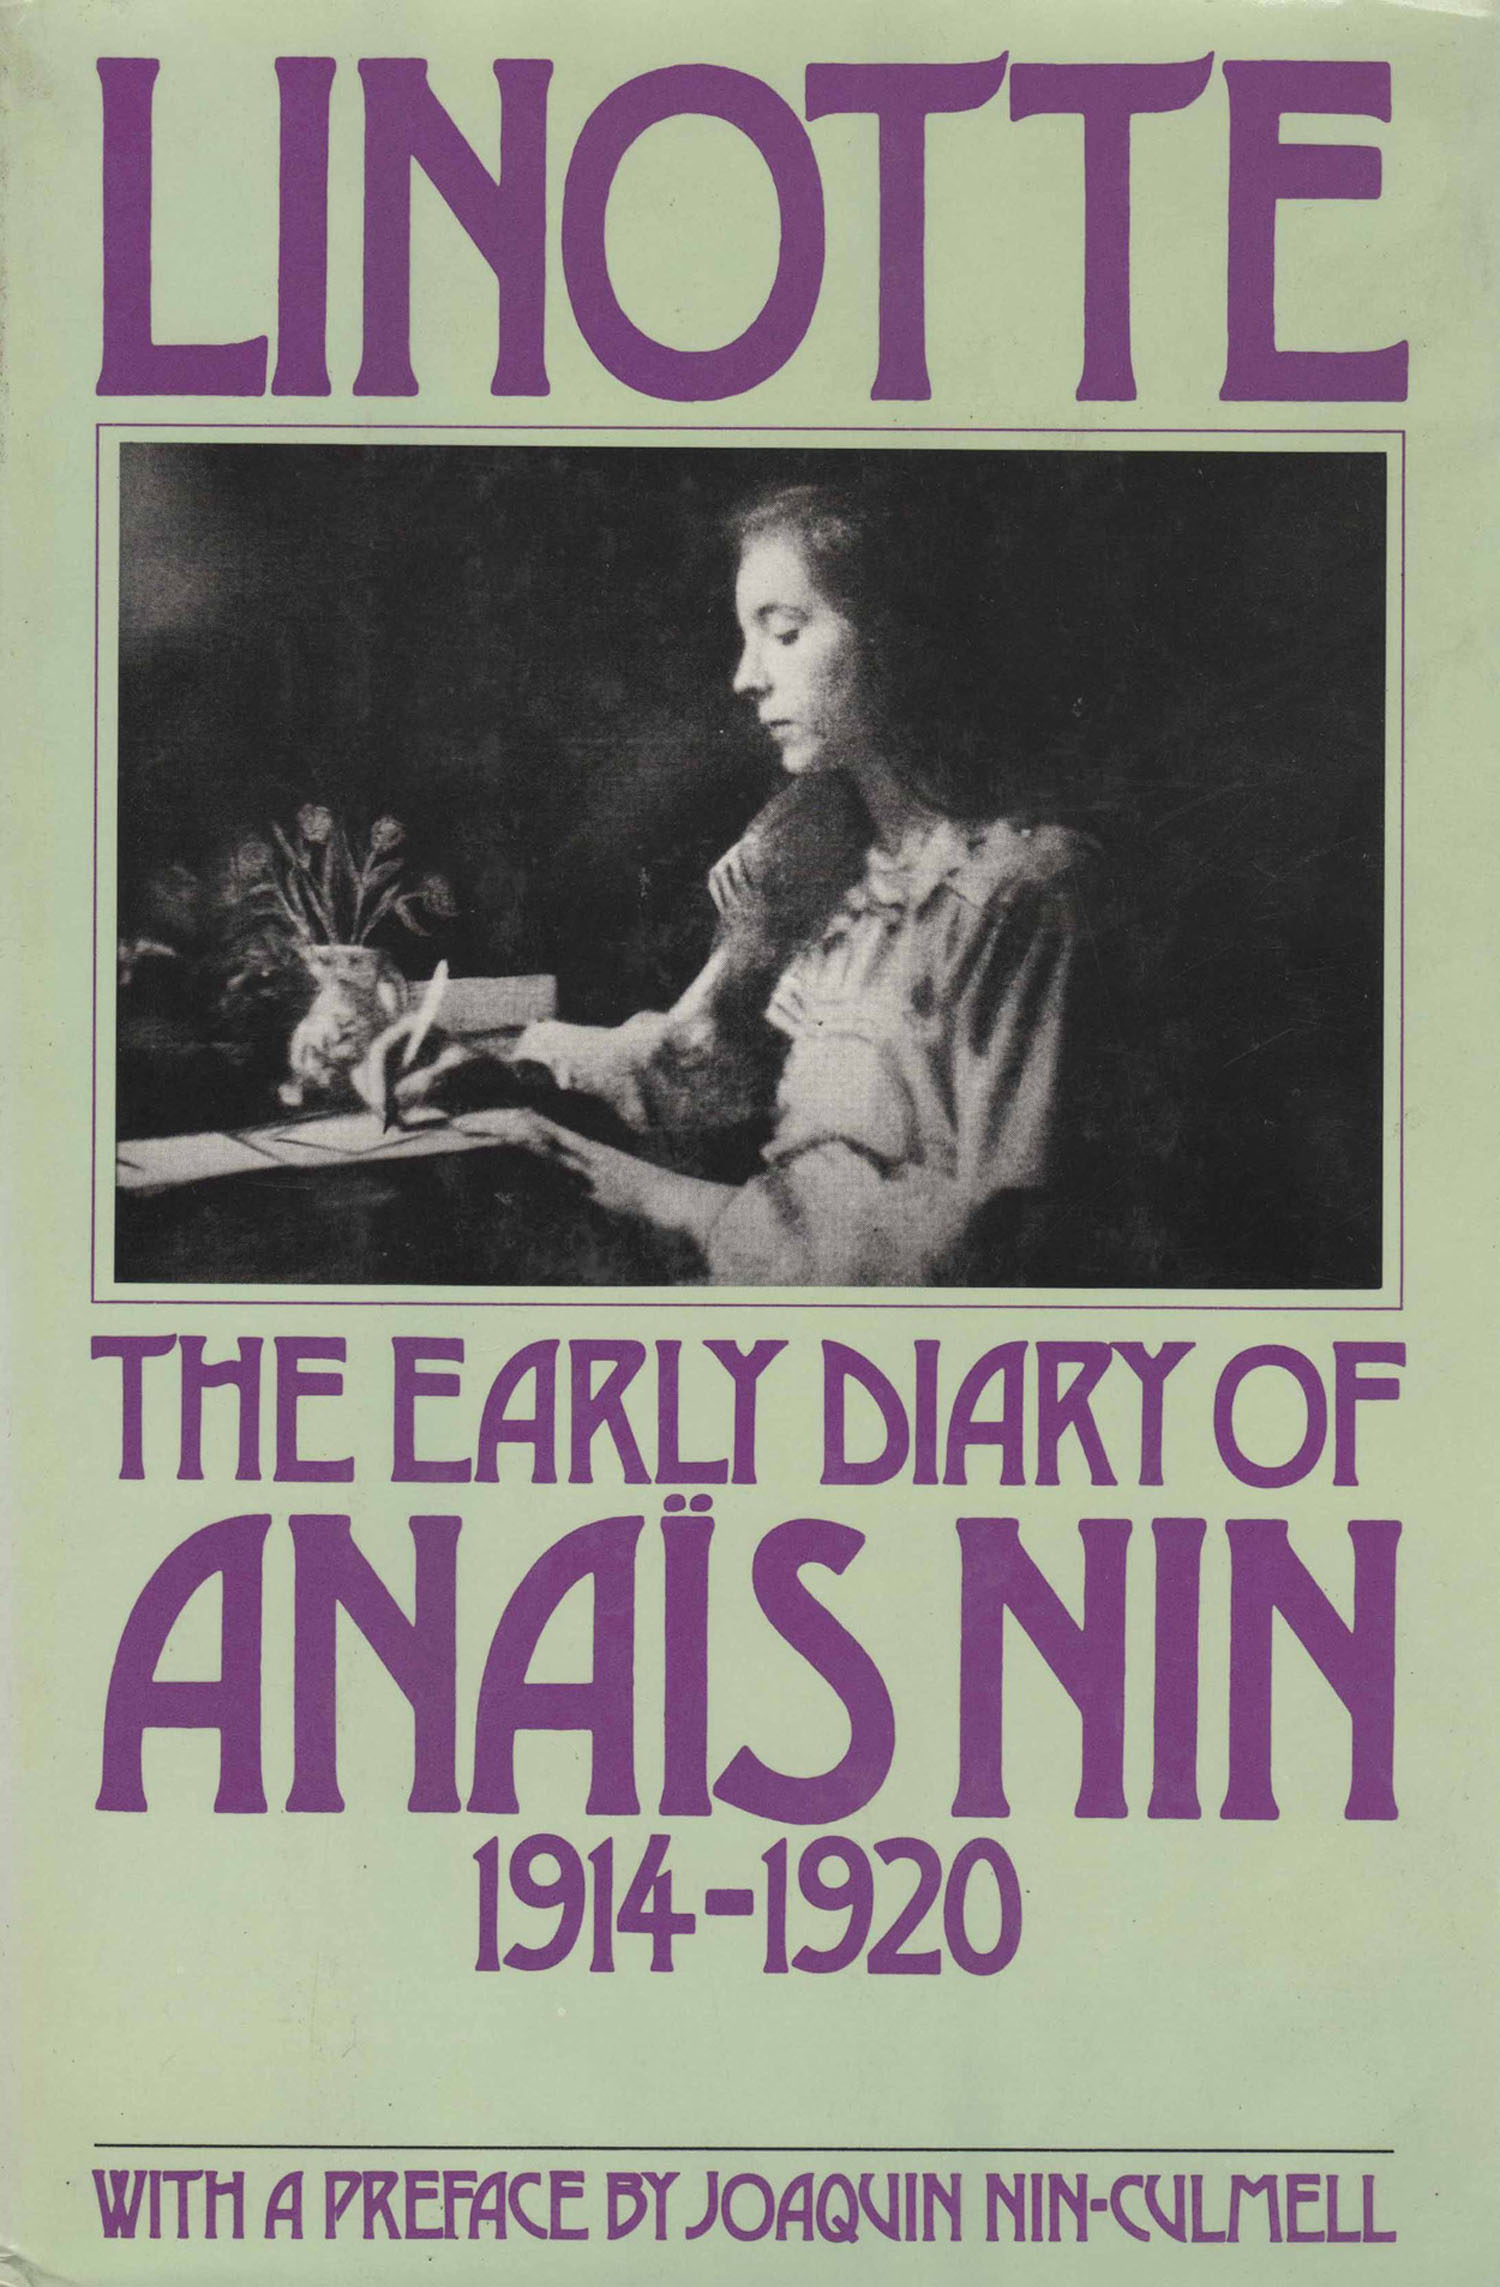 Linotte: The Early Diary of Anais Nin